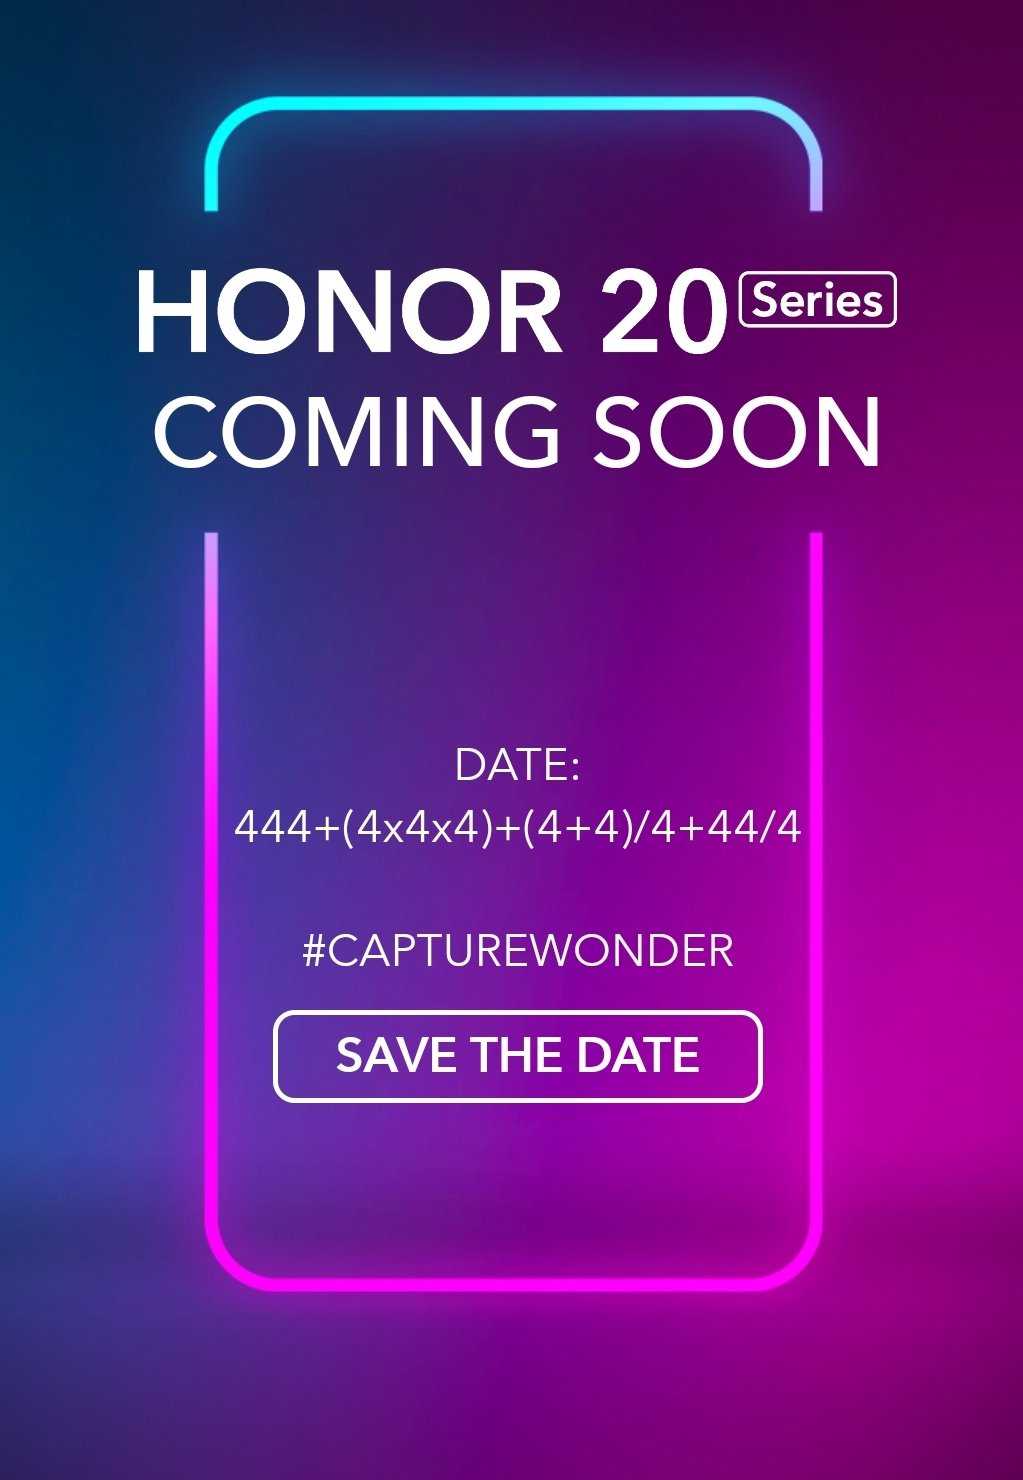 Honor 20 series launch date revealed